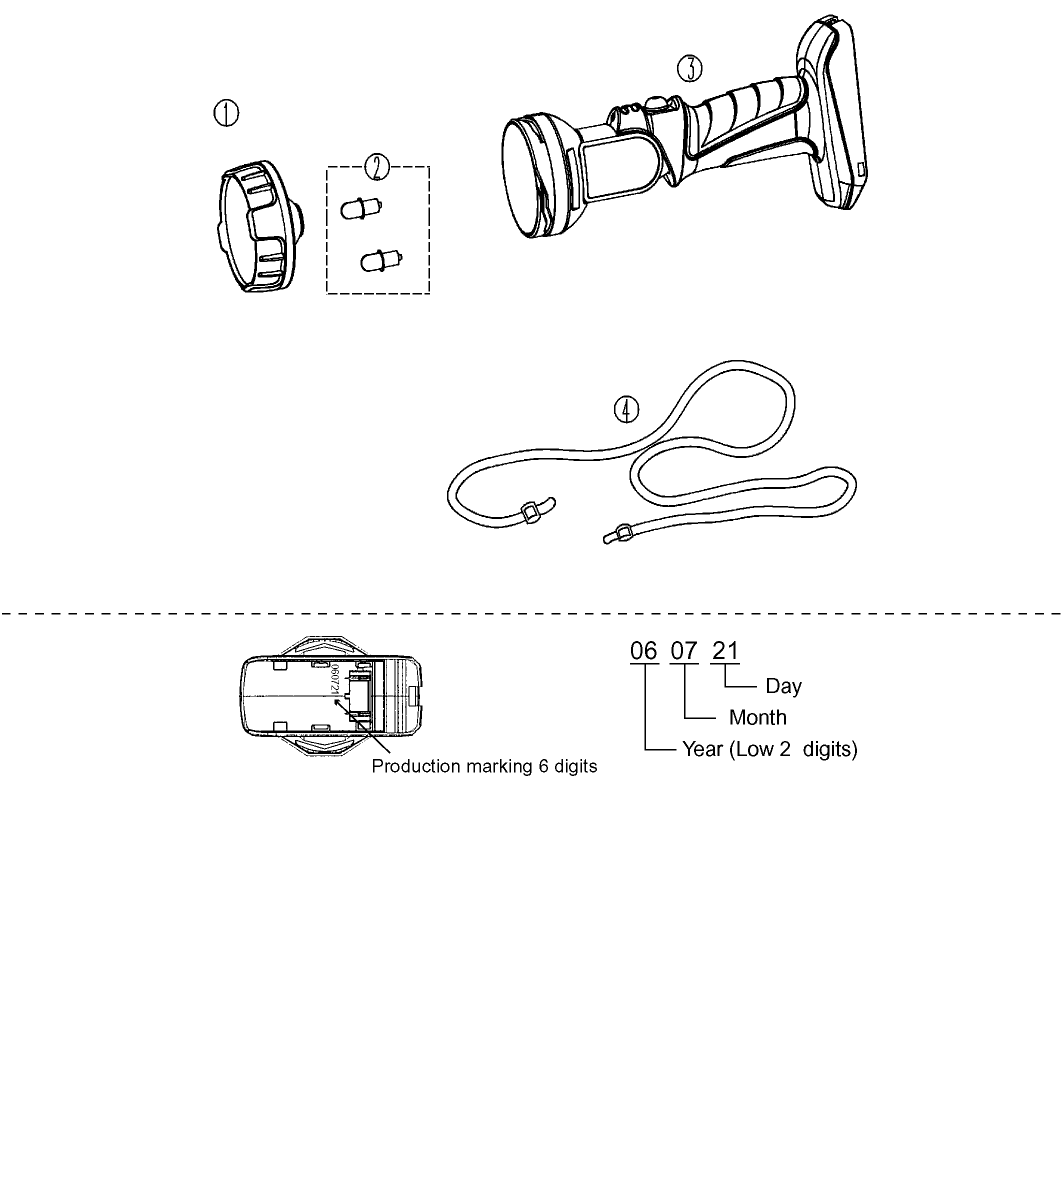 EY3740: Exploded View